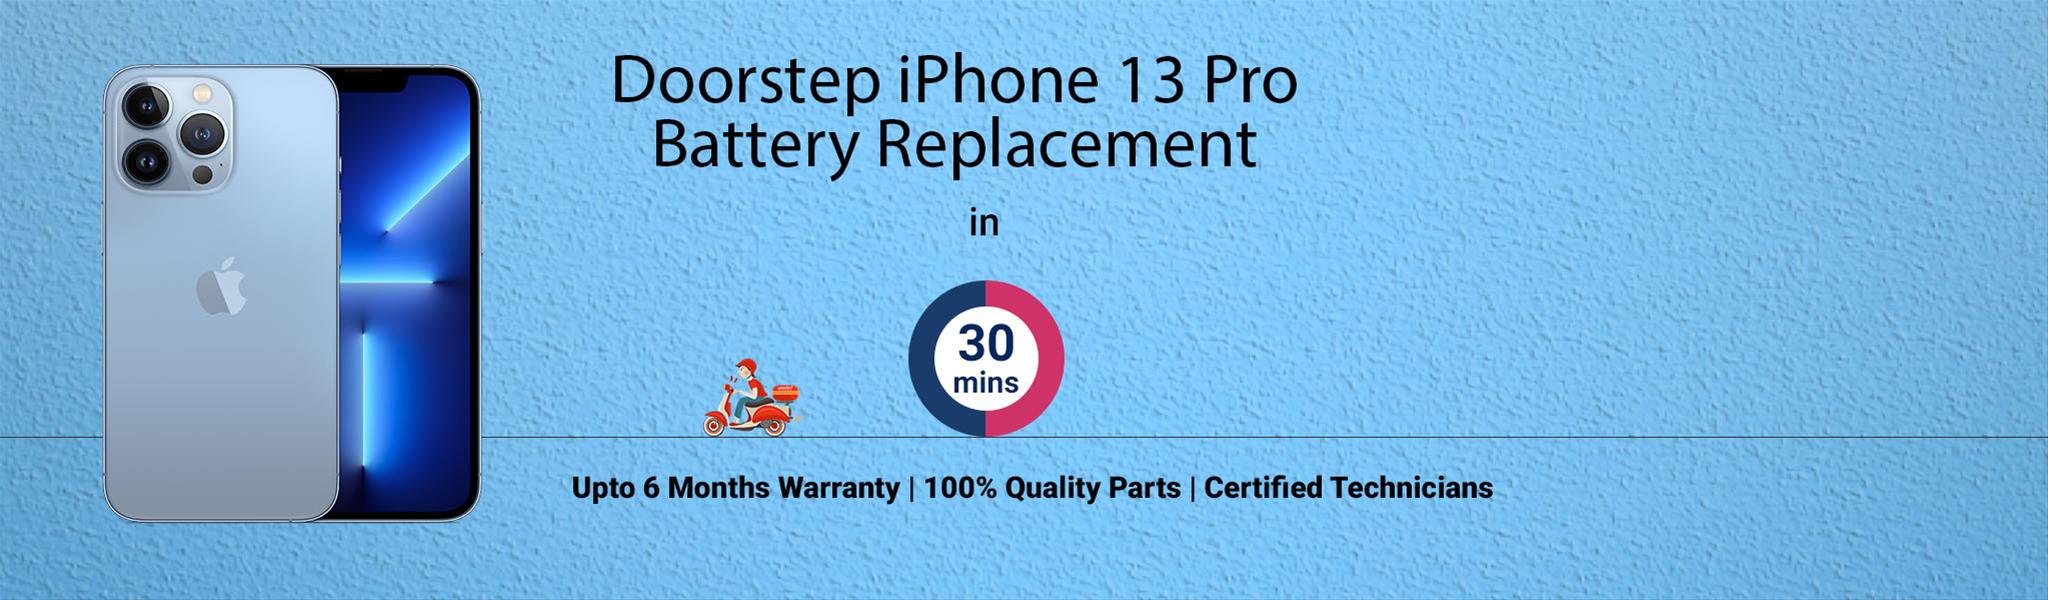 iphone-13-pro-battery-replacement.jpg